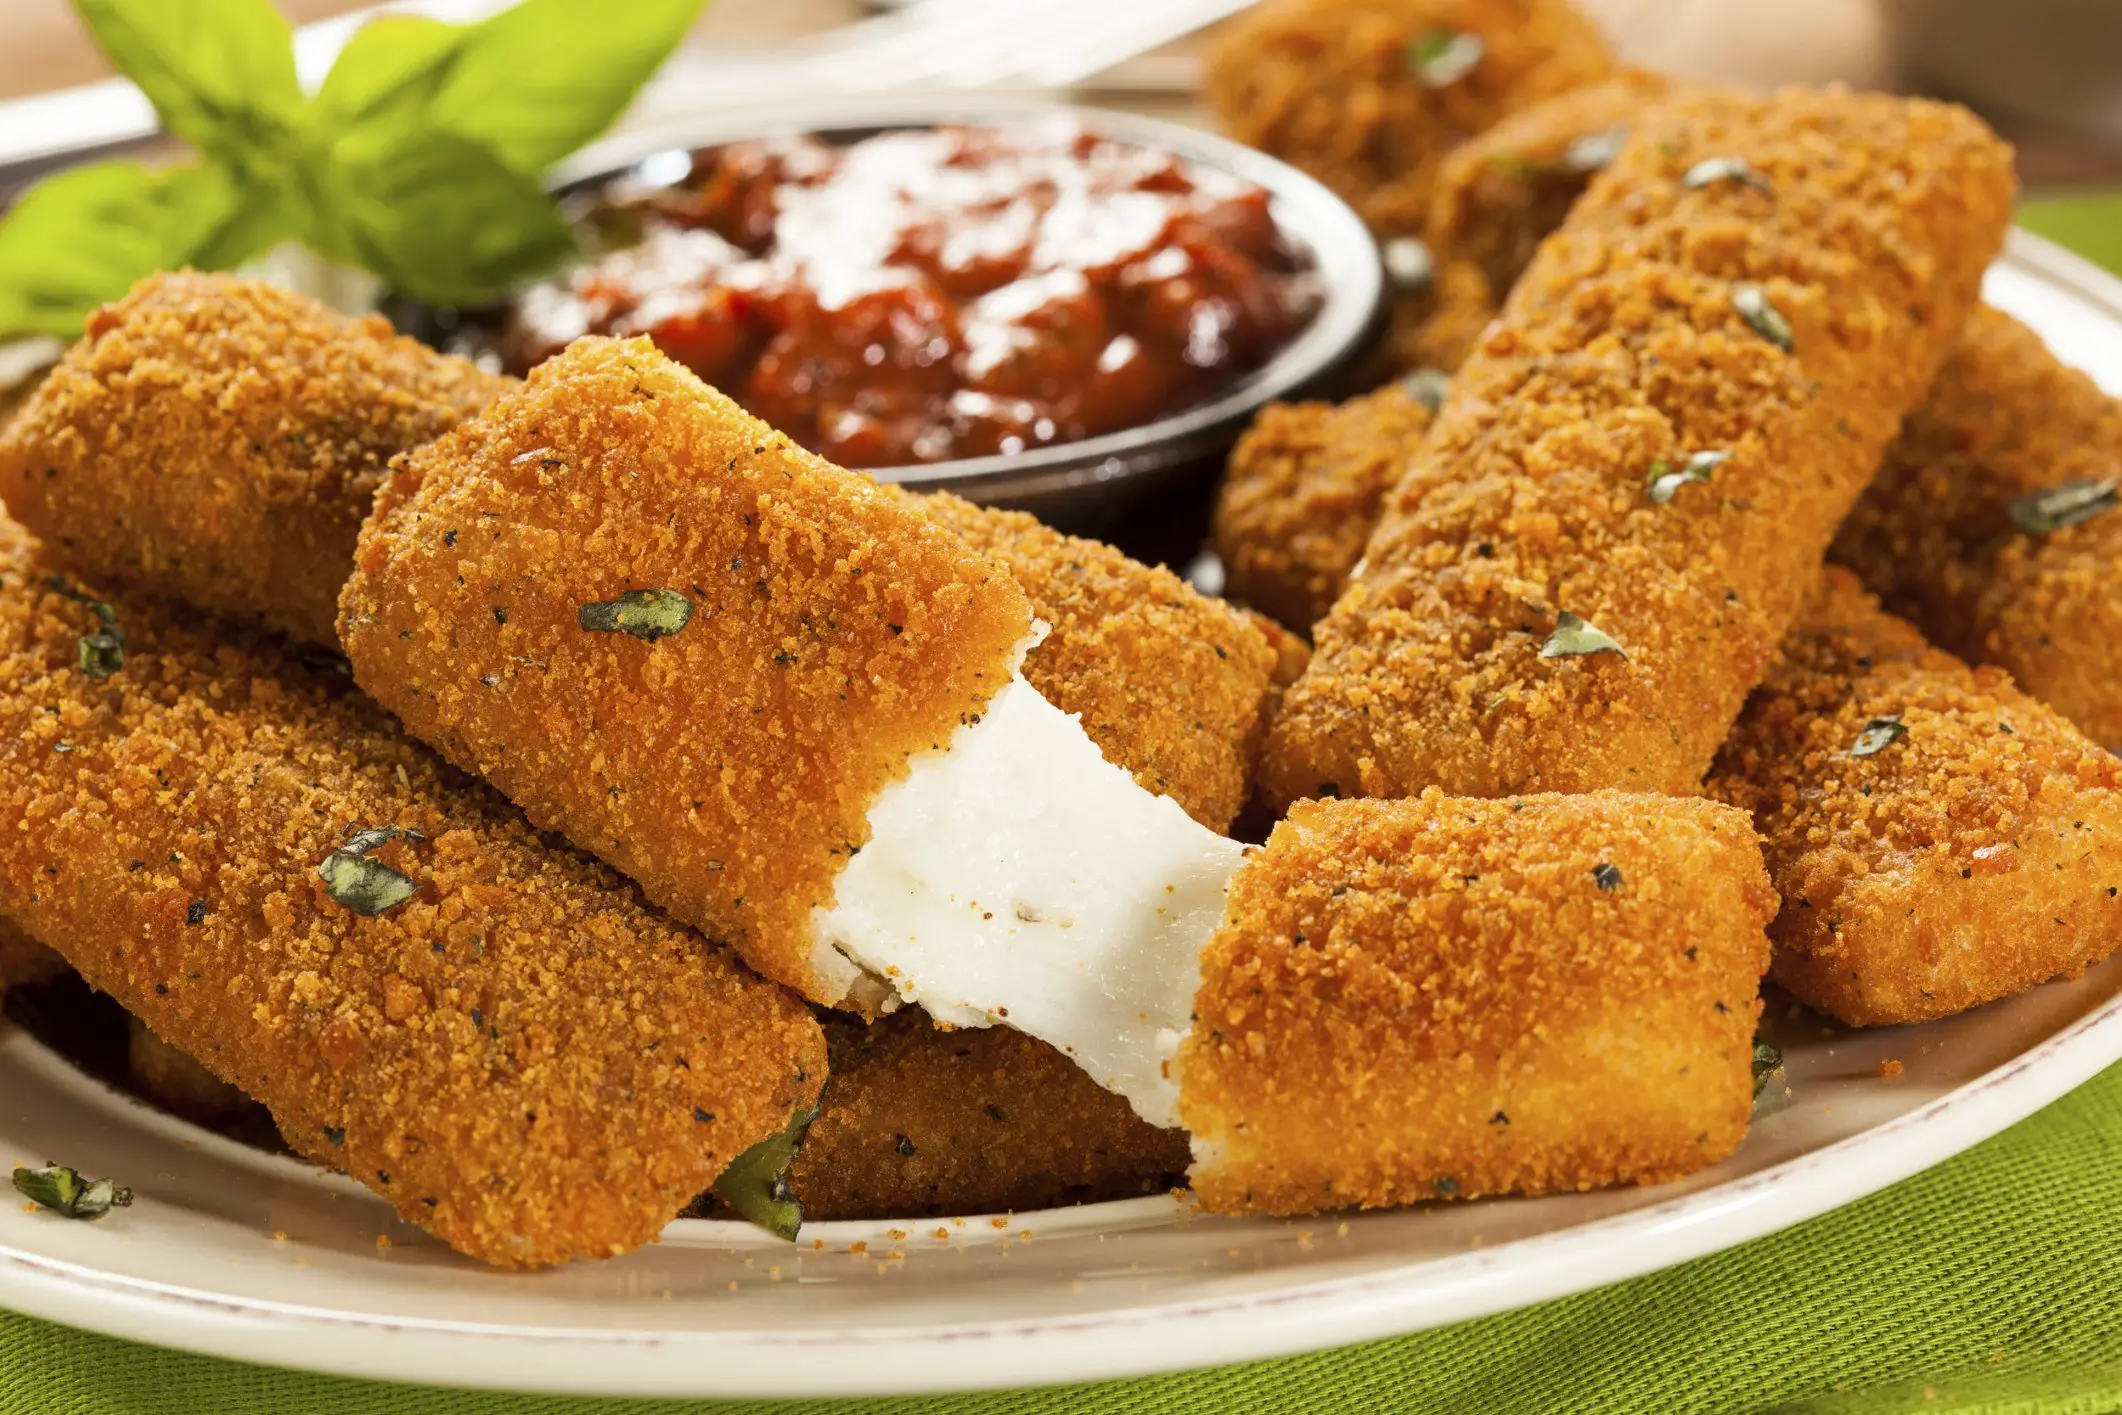 How to Make Mozzarella Sticks (with Pictures)